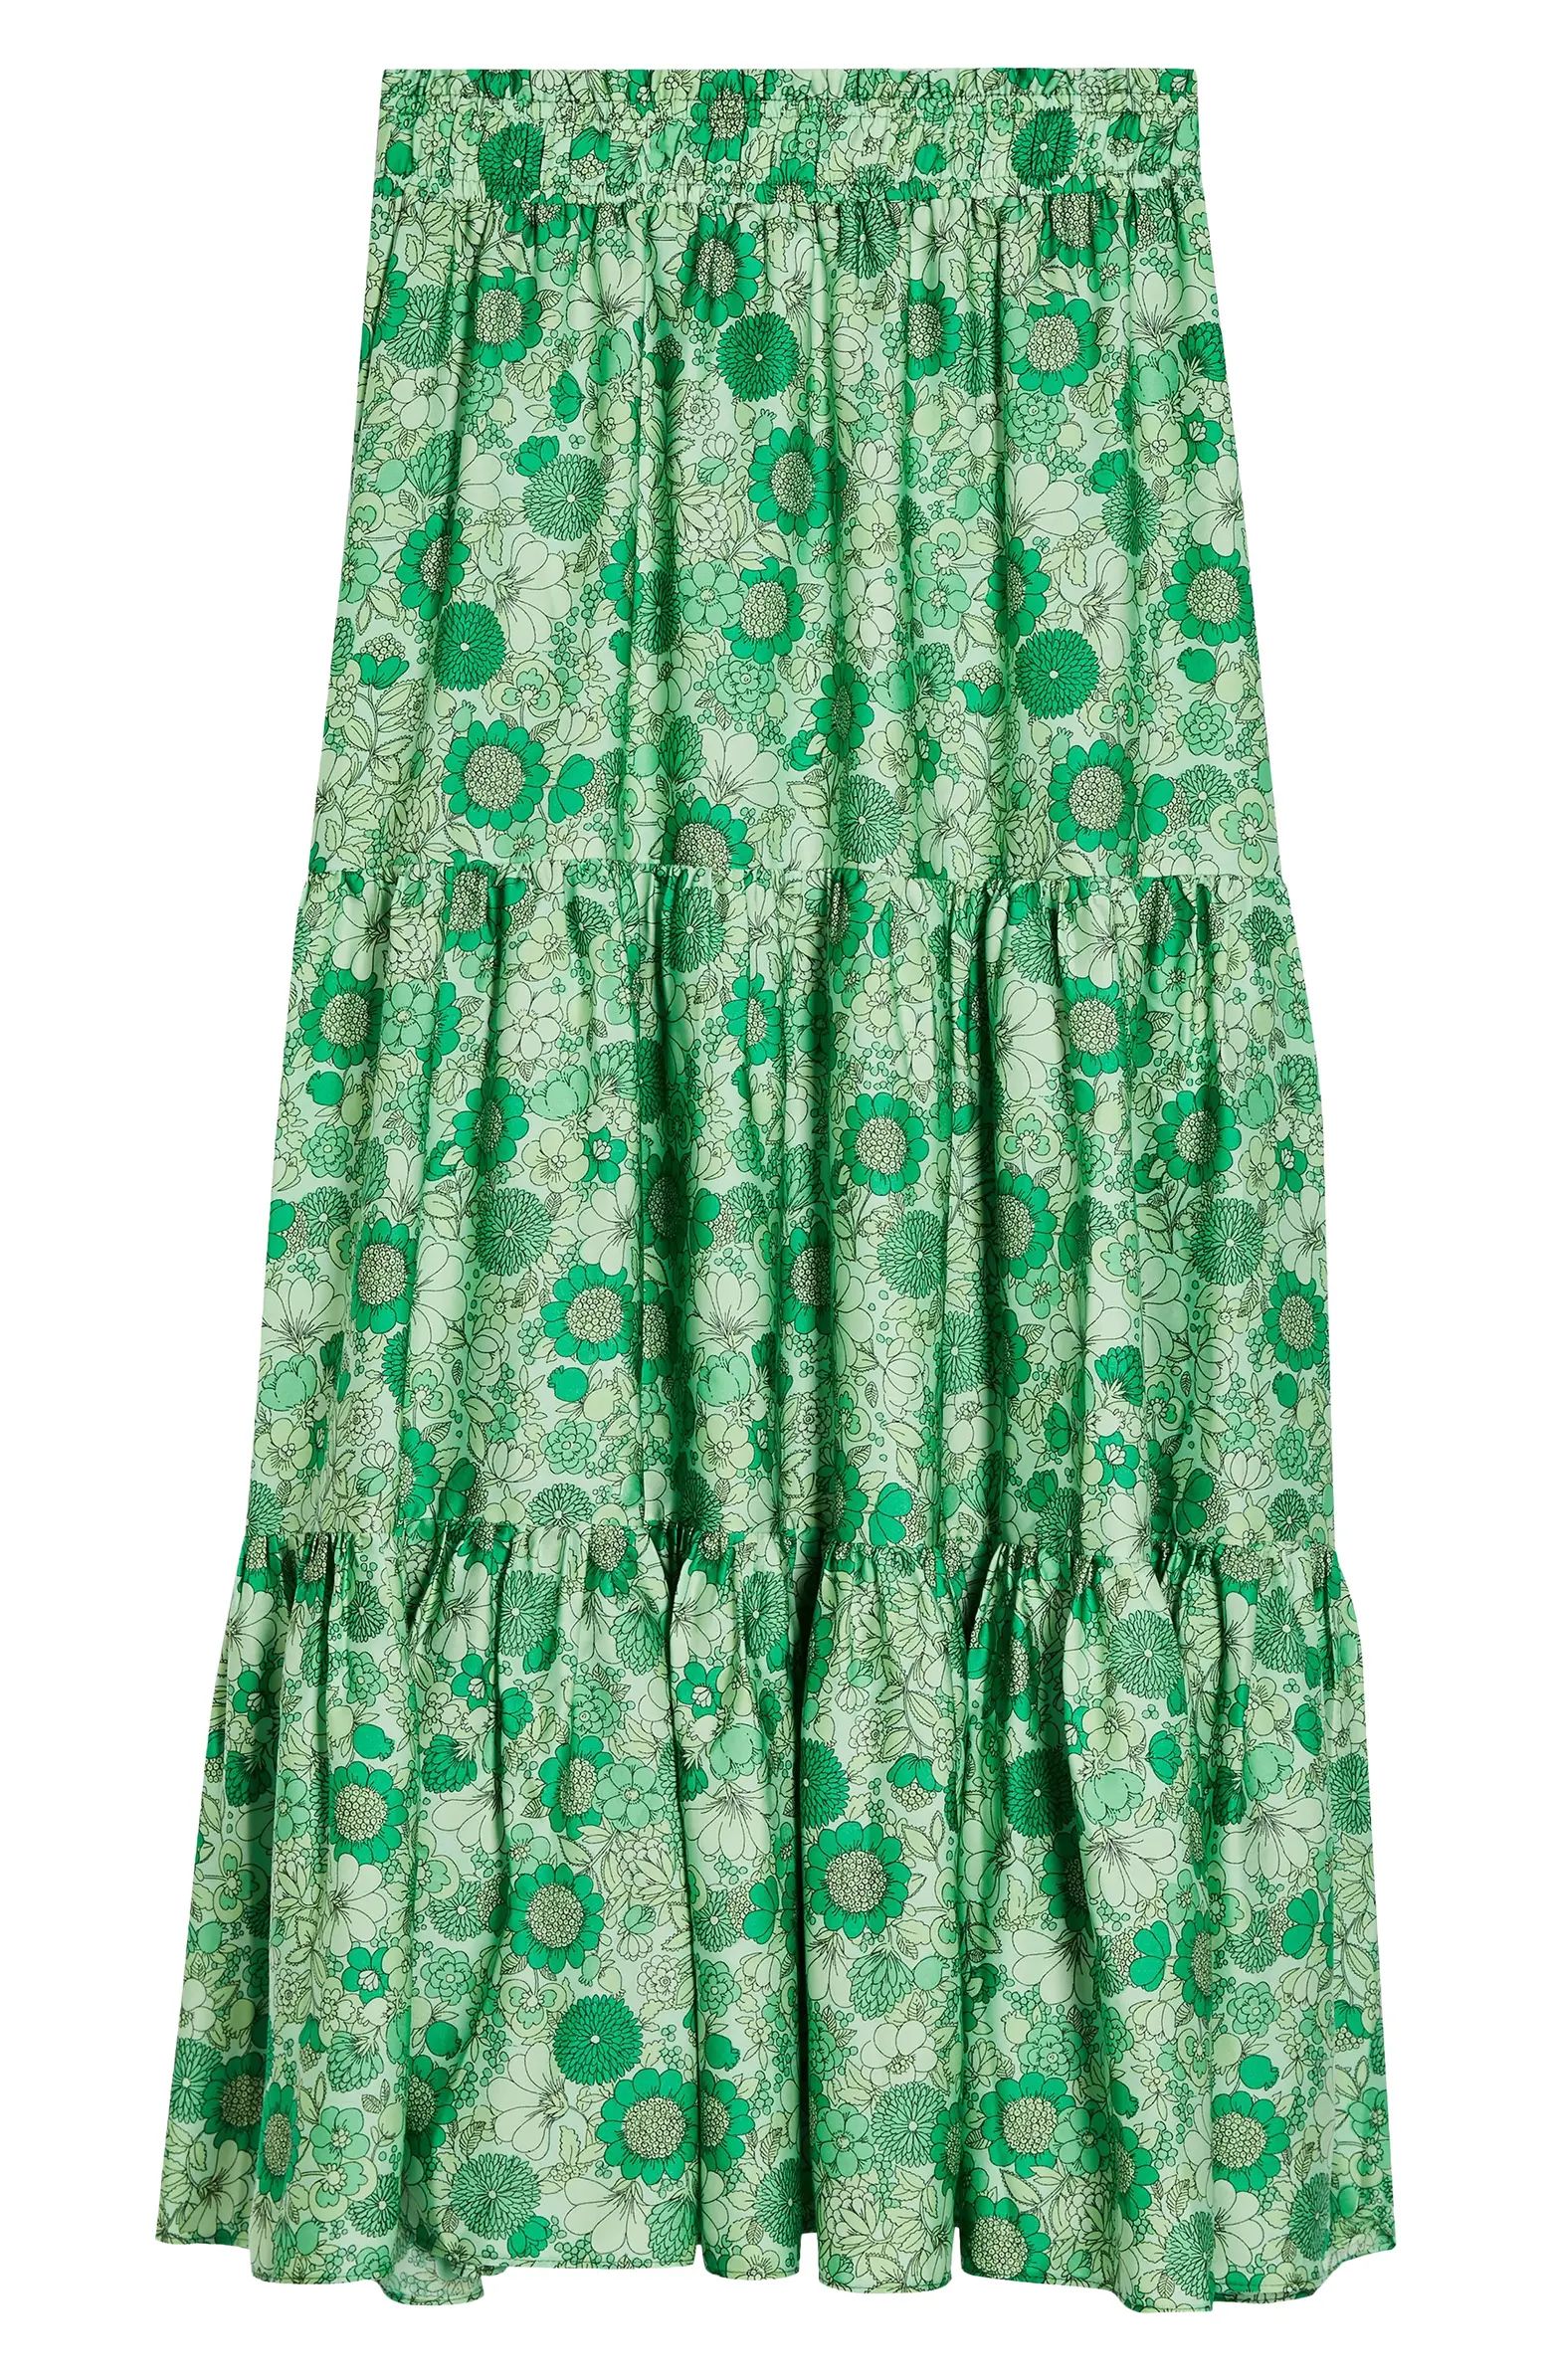 '70s Floral Tiered Midi Skirt | Nordstrom